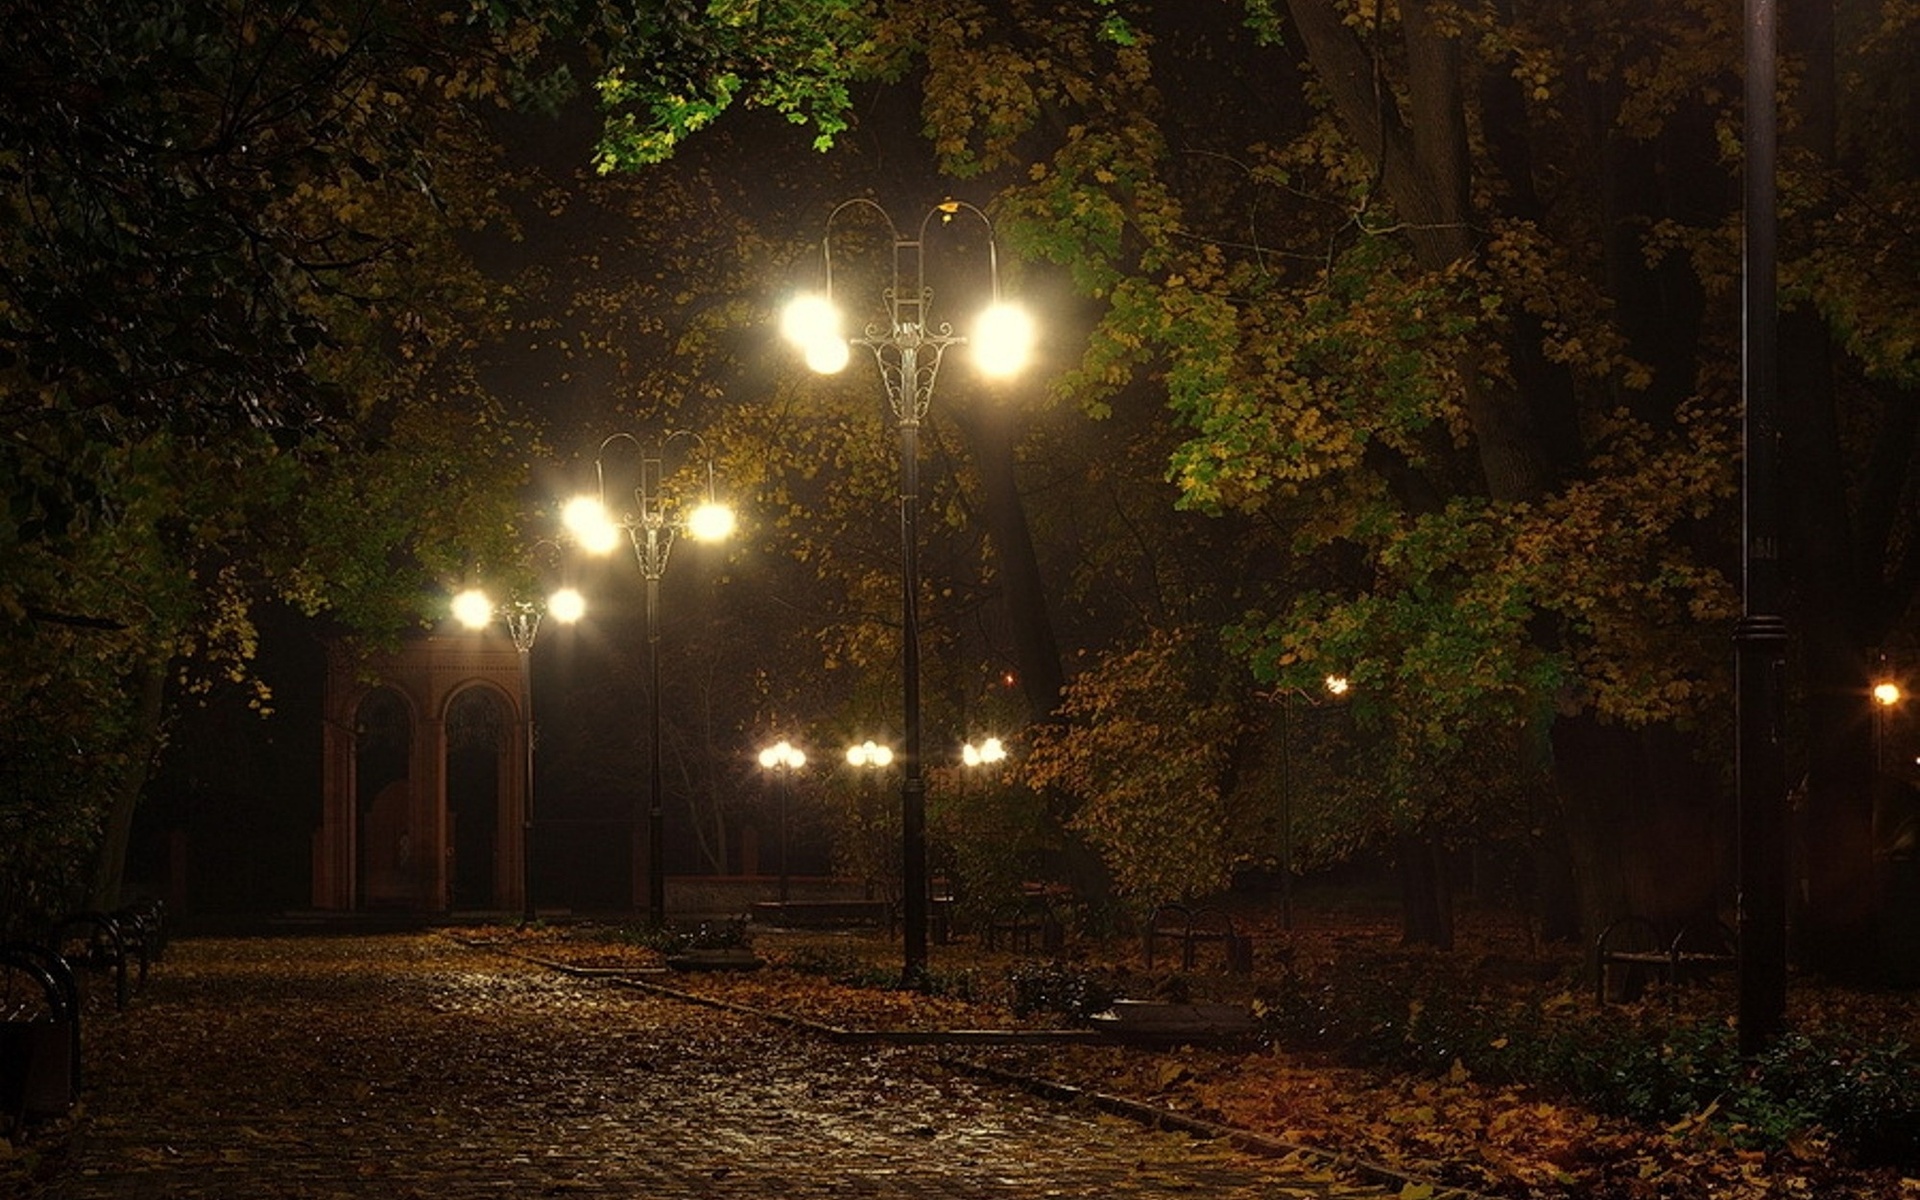 landscapes, Lamps, Lamp posts, Benches, Lights, Night, Pathways, Roads, Lanes, Autumn, Fall, Seasons, Trees, Leaves, Moo Wallpaper